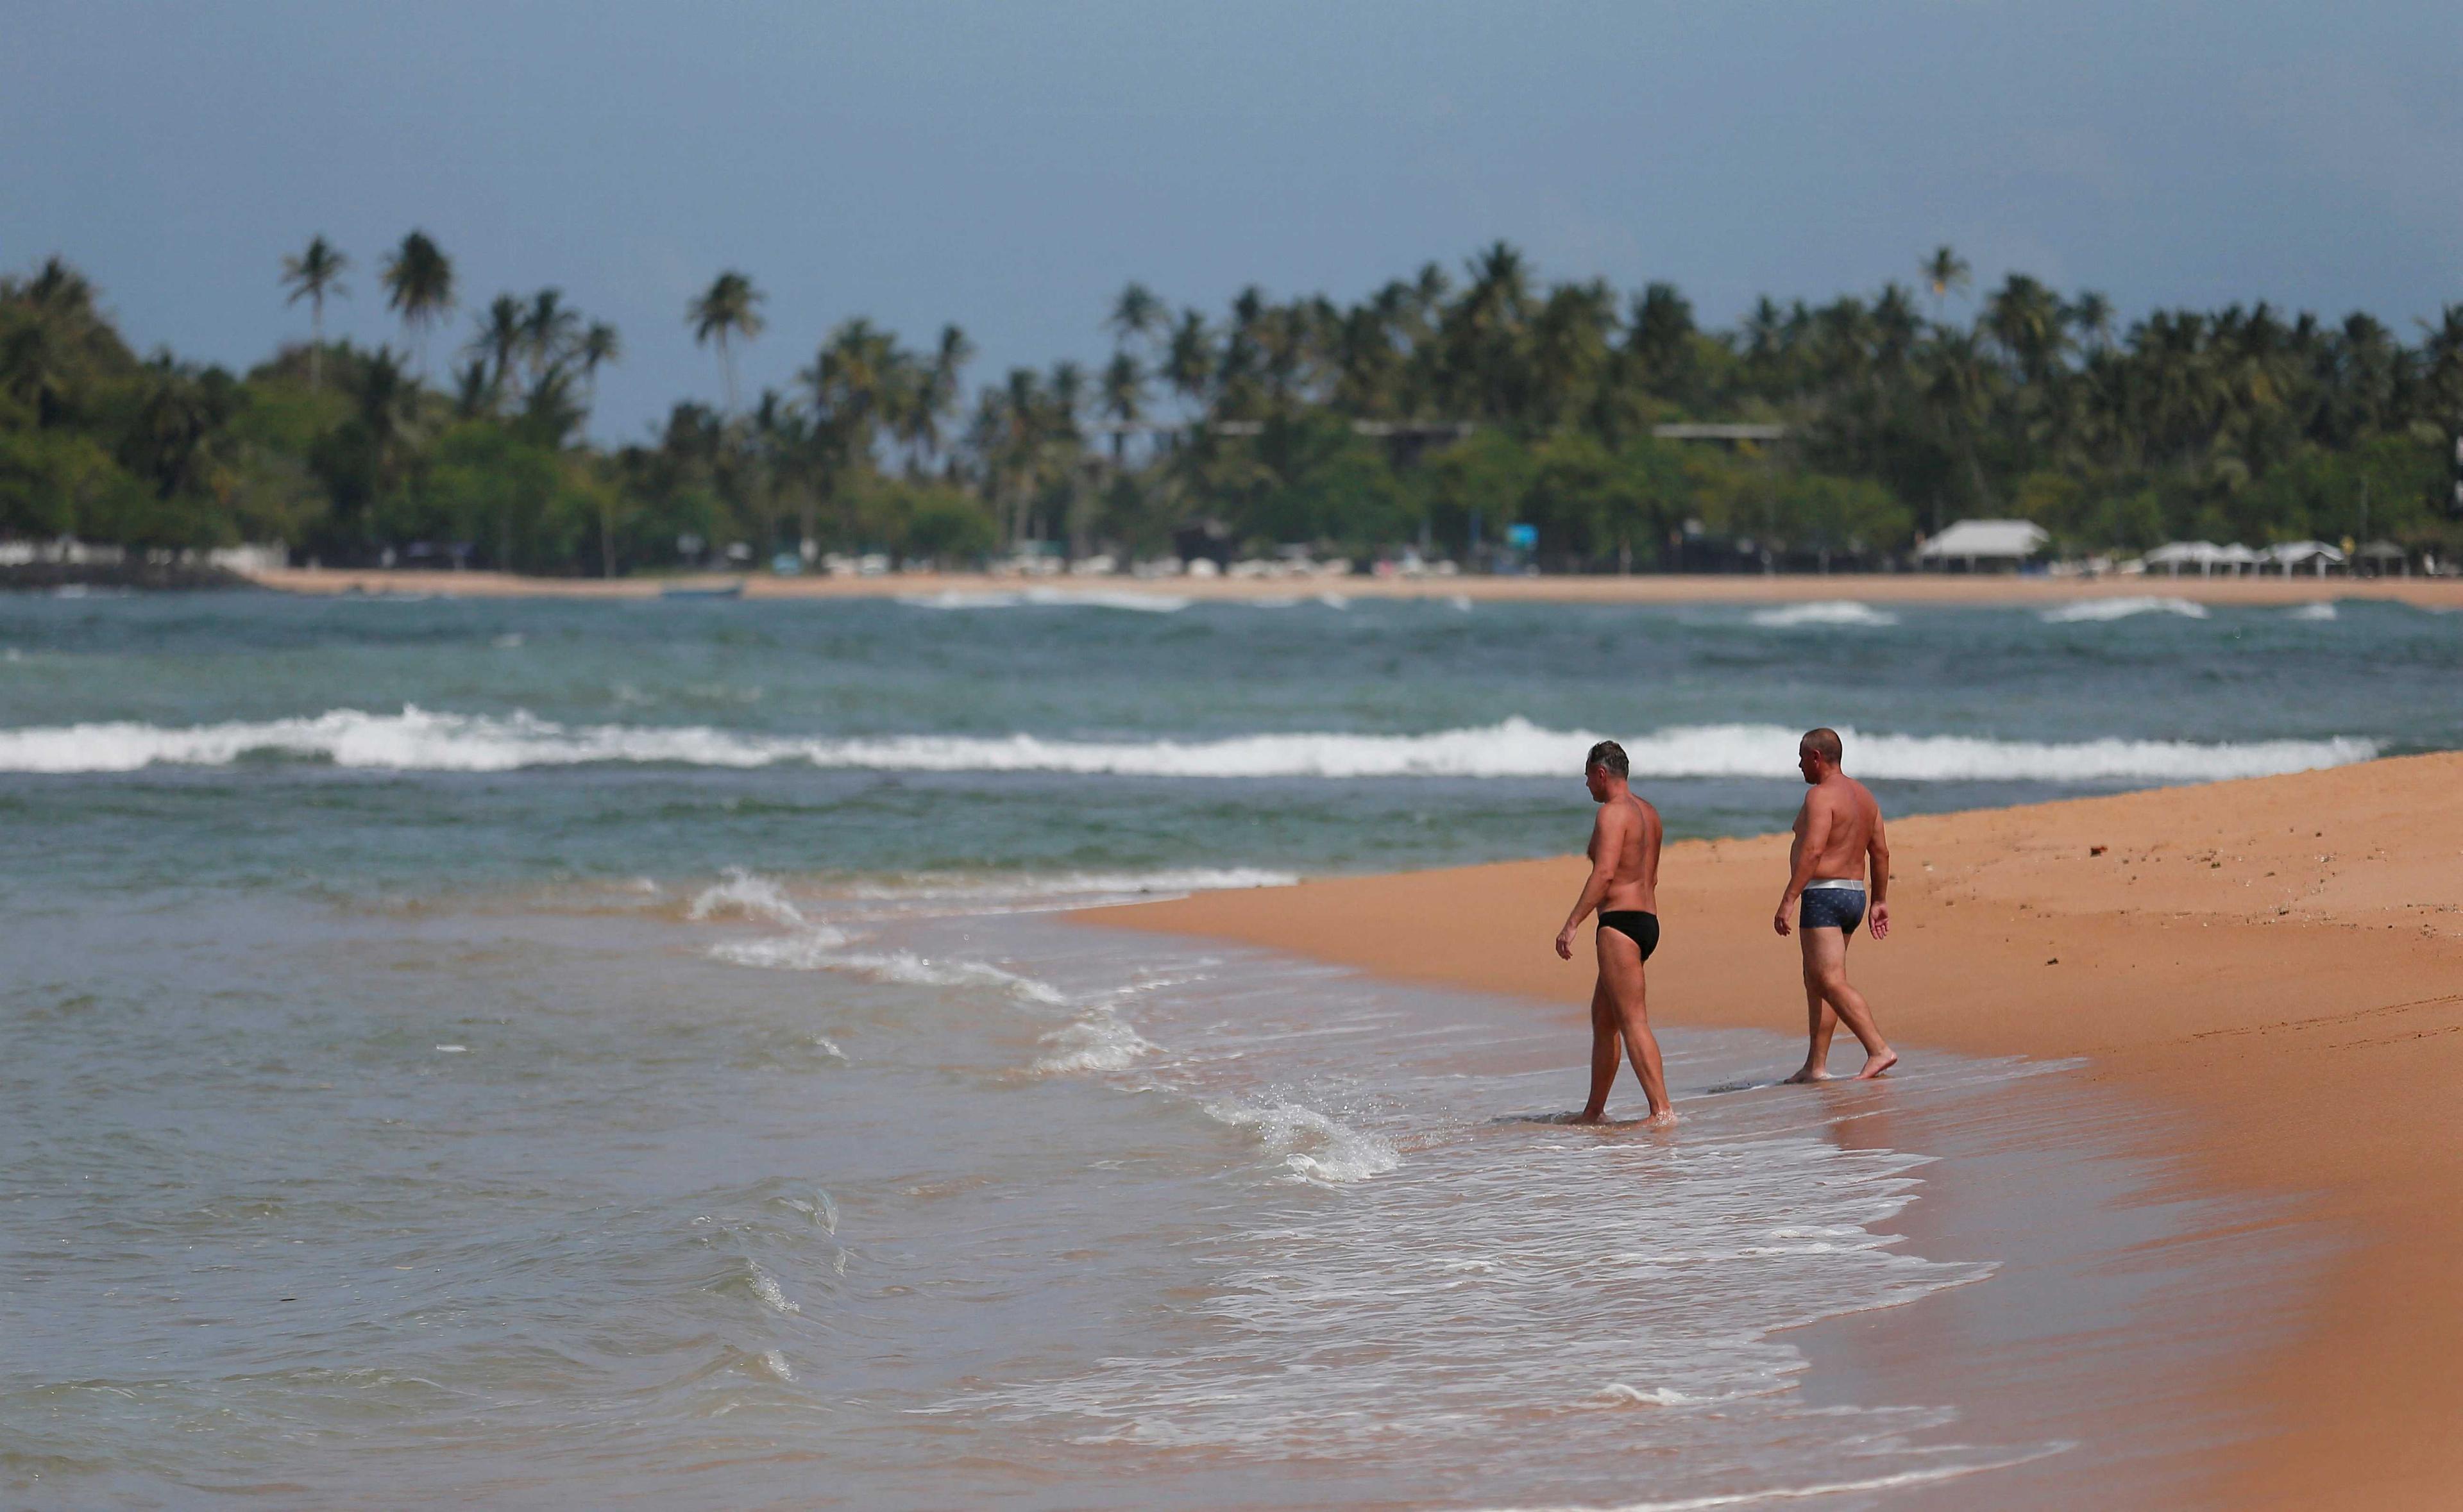 Tourists get into the water at Unawatuna beach in Galle, Sri Lanka July 4, 2019. Photo: Reuters